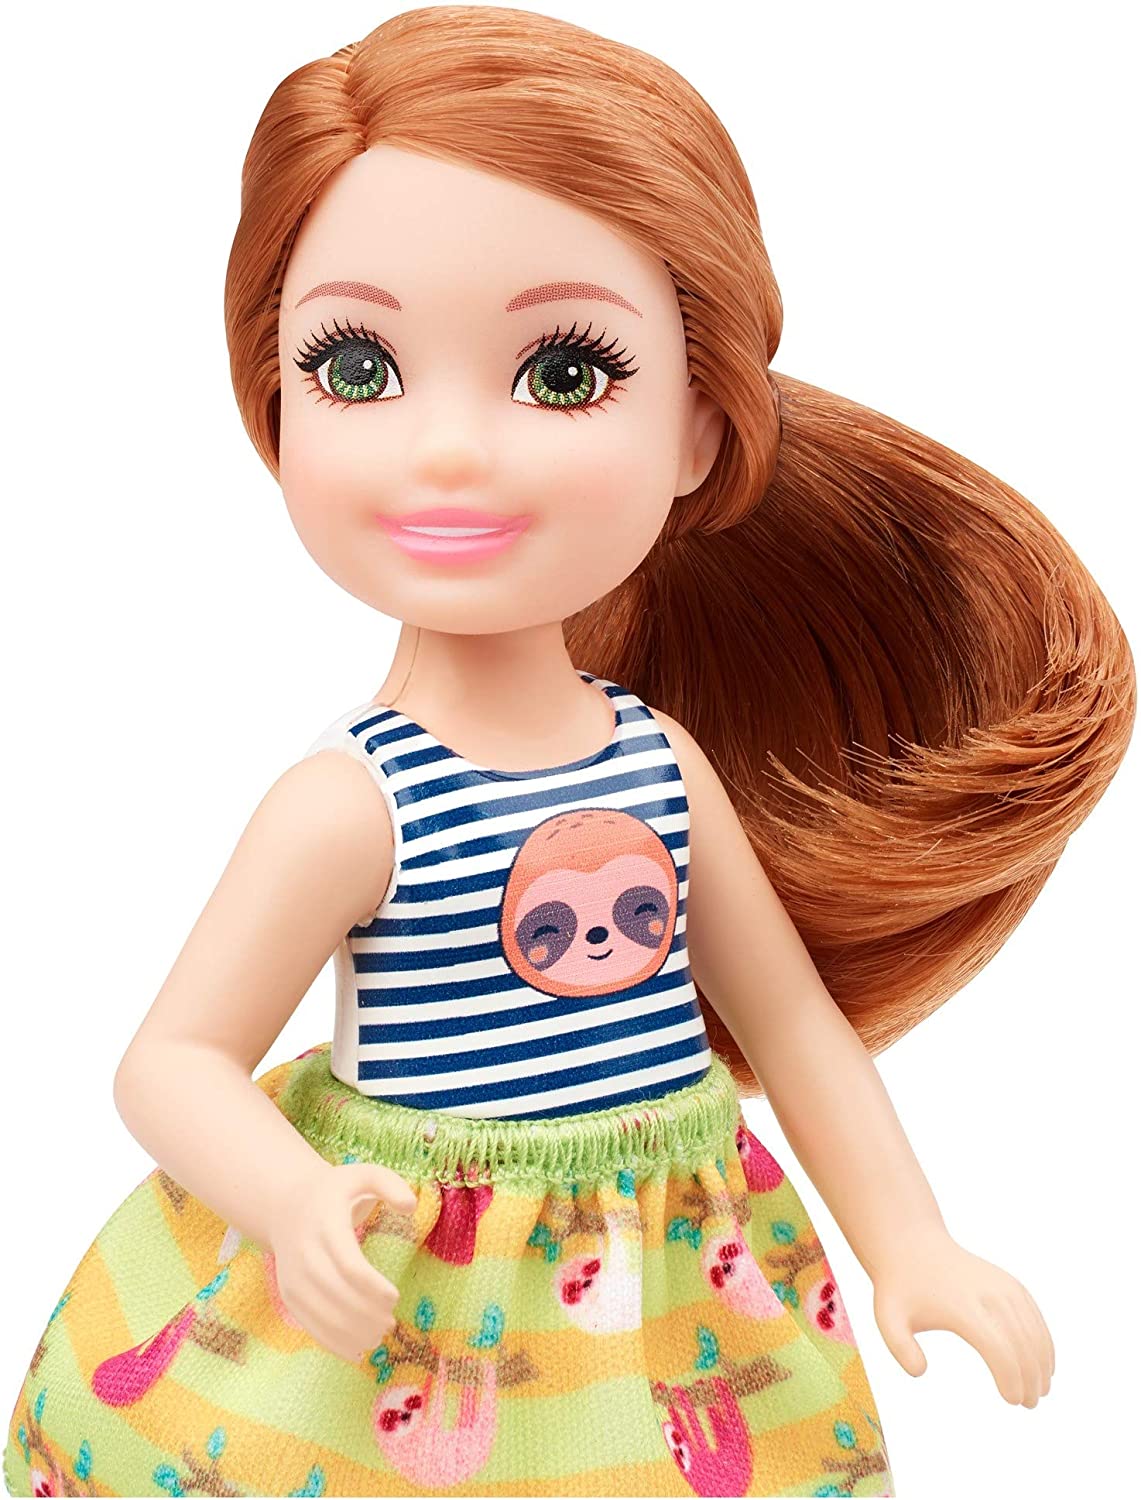 Barbie Club Chelsea Doll 6 Inch With Red Hair Wearing Sloth Graphic